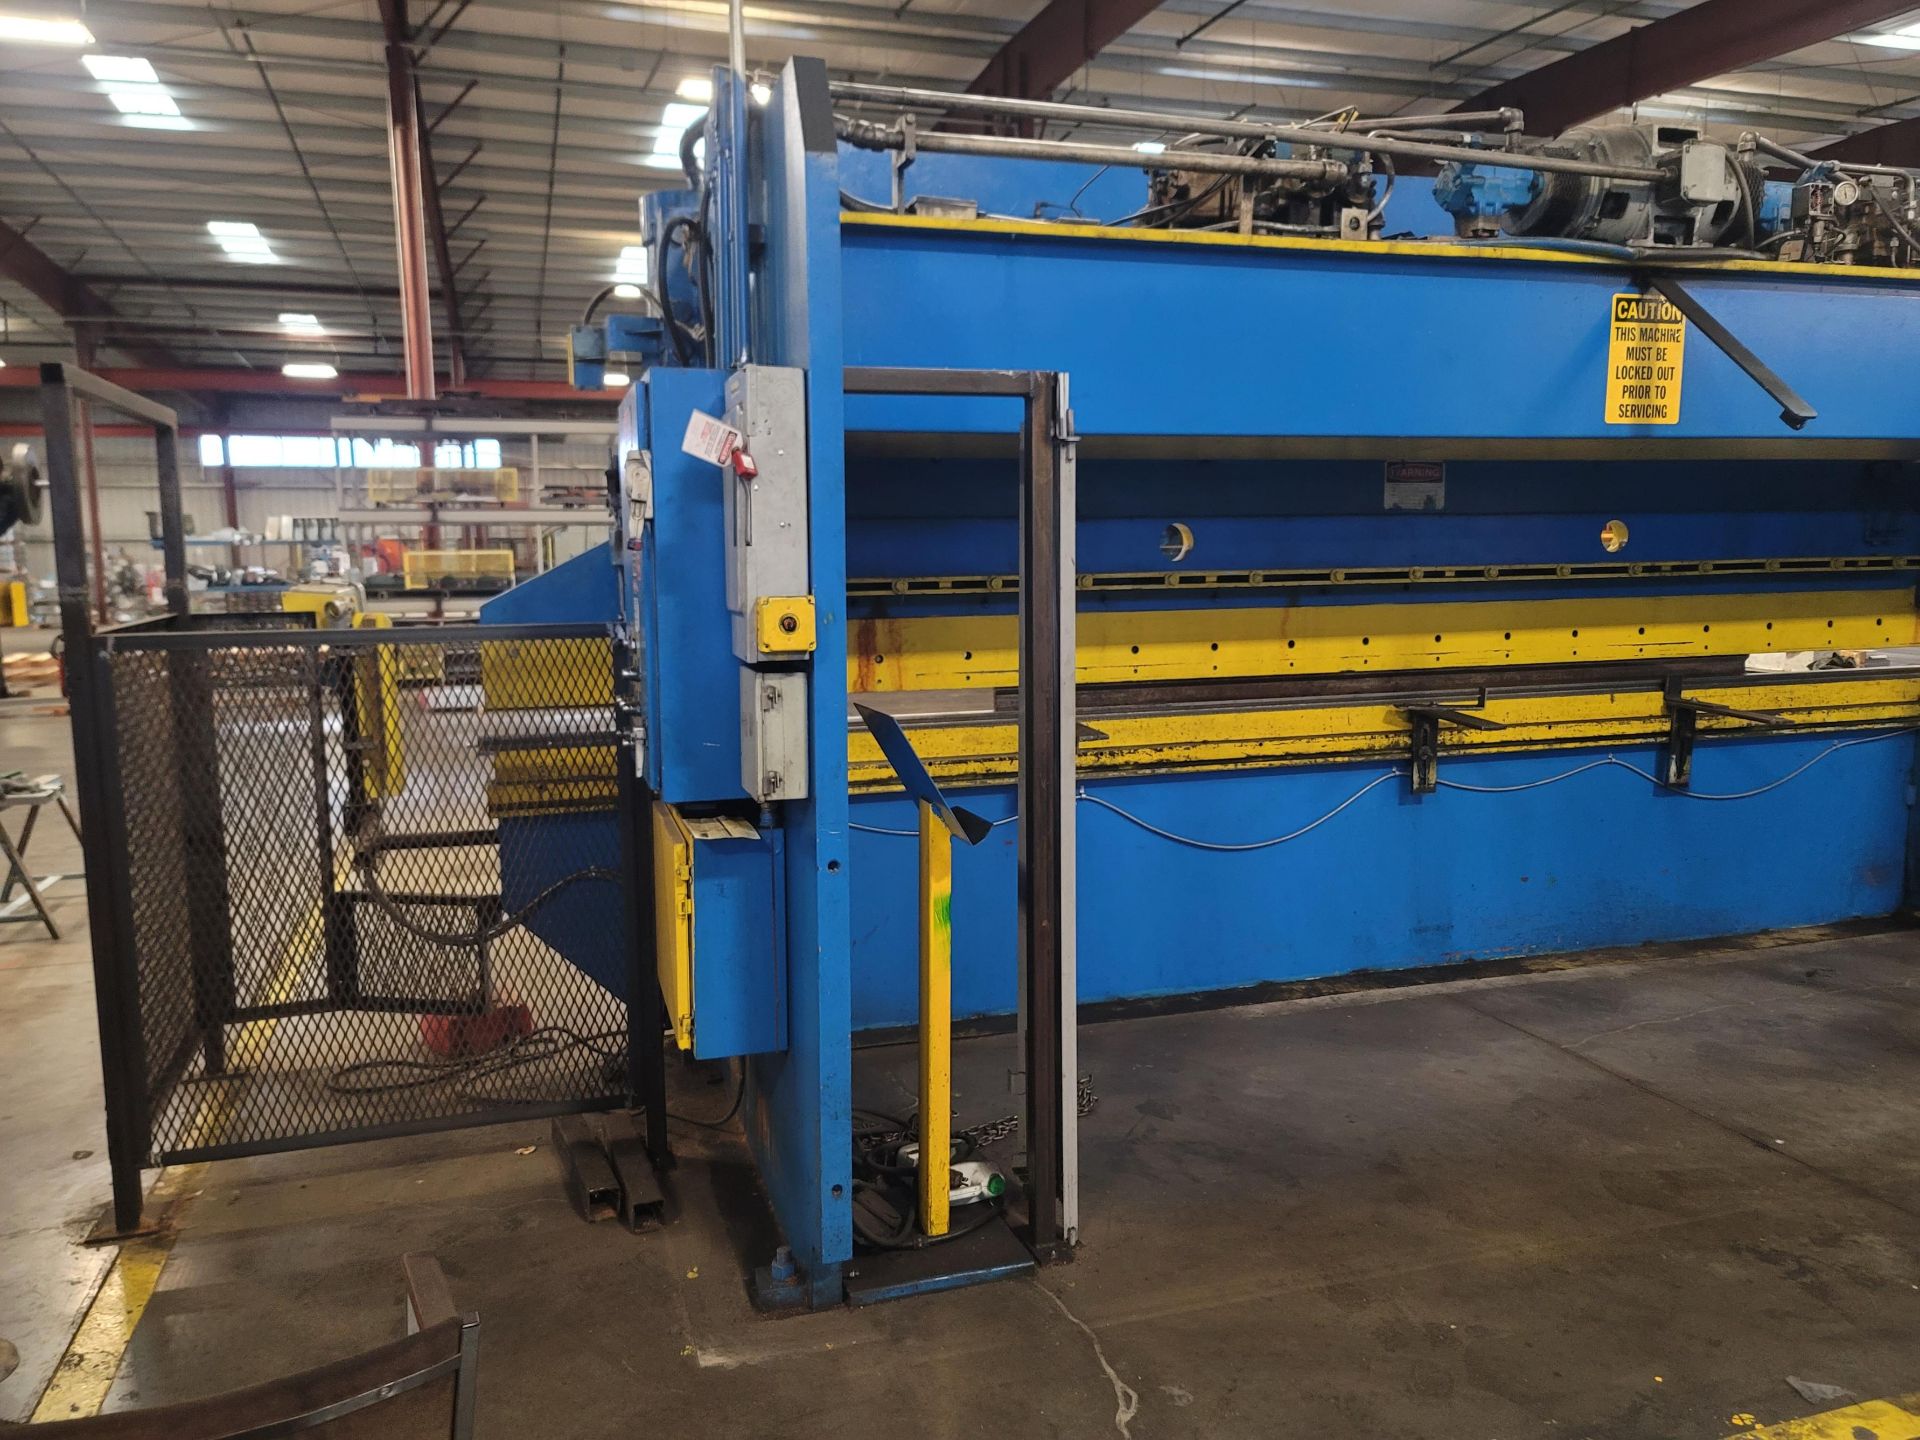 PACIFIC K175-21 PRESS BRAKE, 3/16" X 21', HYDRAULIC, PROTECH EAGLE EYE GUARDING SYSTEM, S/N 8902 - Image 7 of 12